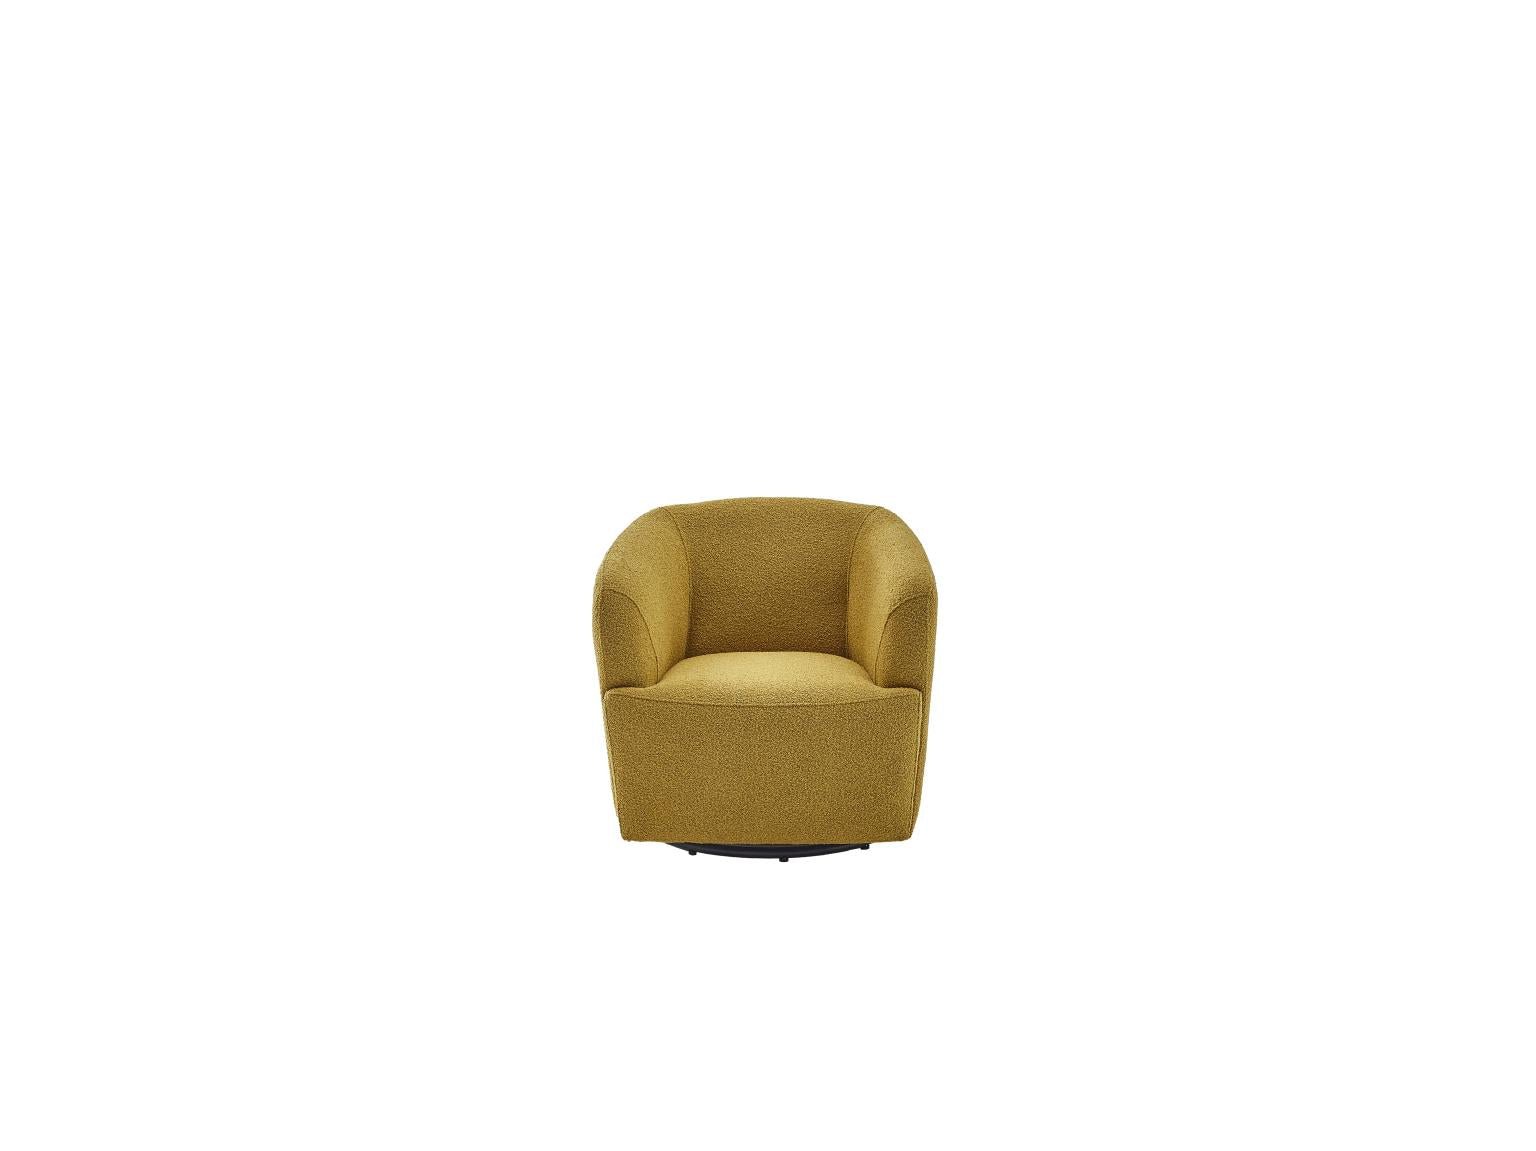 Picasso Swivel Chair (Oscar Mustard) by Bellona